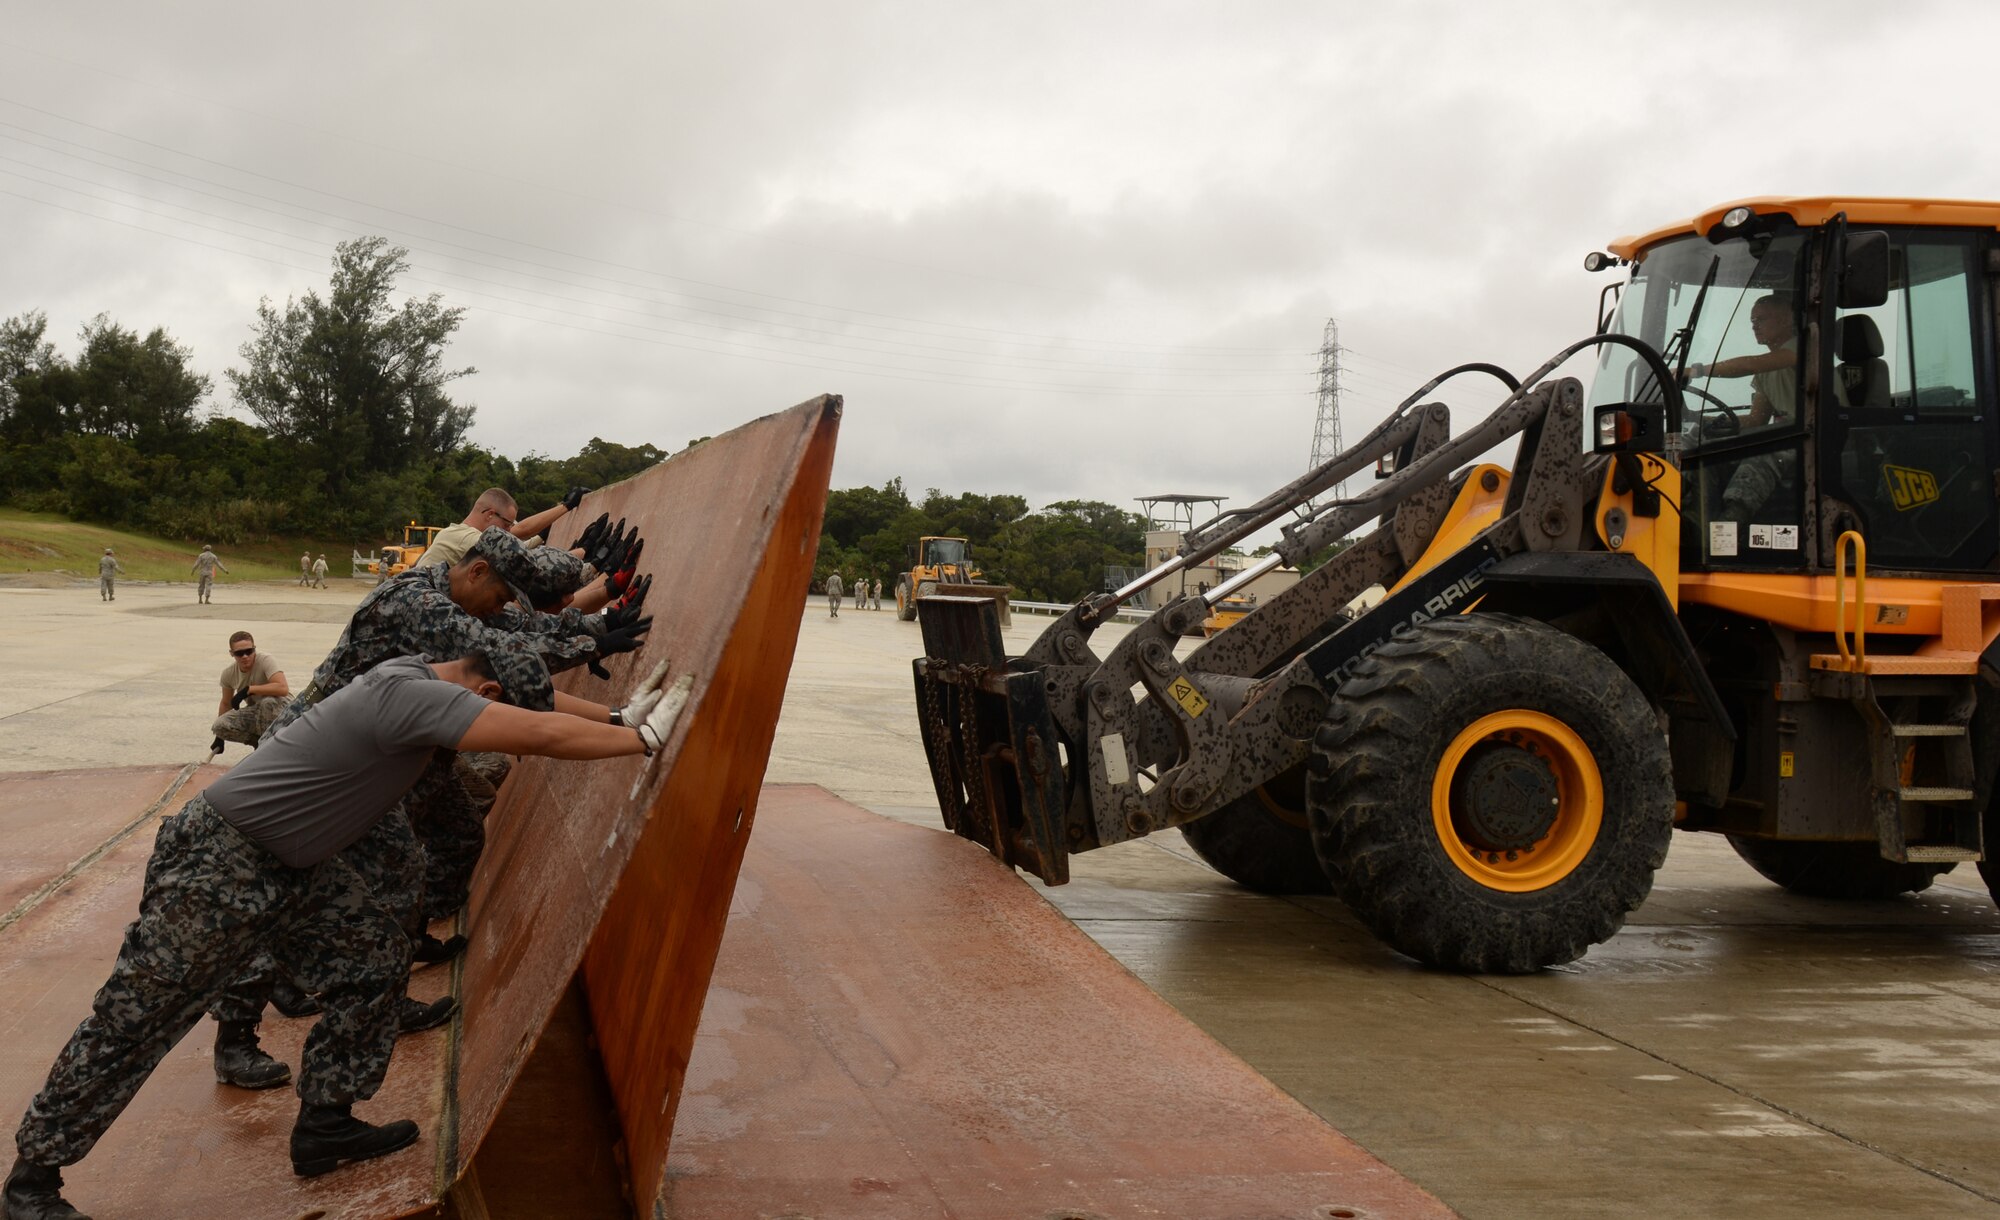 Civil engineers from the Japan Air Self Defense Force Southwestern Composite Air Division and the U.S. Air Force 18th Wing fold a fiberglass mat during the bilateral training day, Oct. 22, 2015, on Kadena Air Base, Japan. Civil engineers from Naha Air Base and Kadena Air Base improved bilateral relations by training together to repair a 50 foot crater. (U.S. Air Force photo by Senior Airman Omari Bernard)